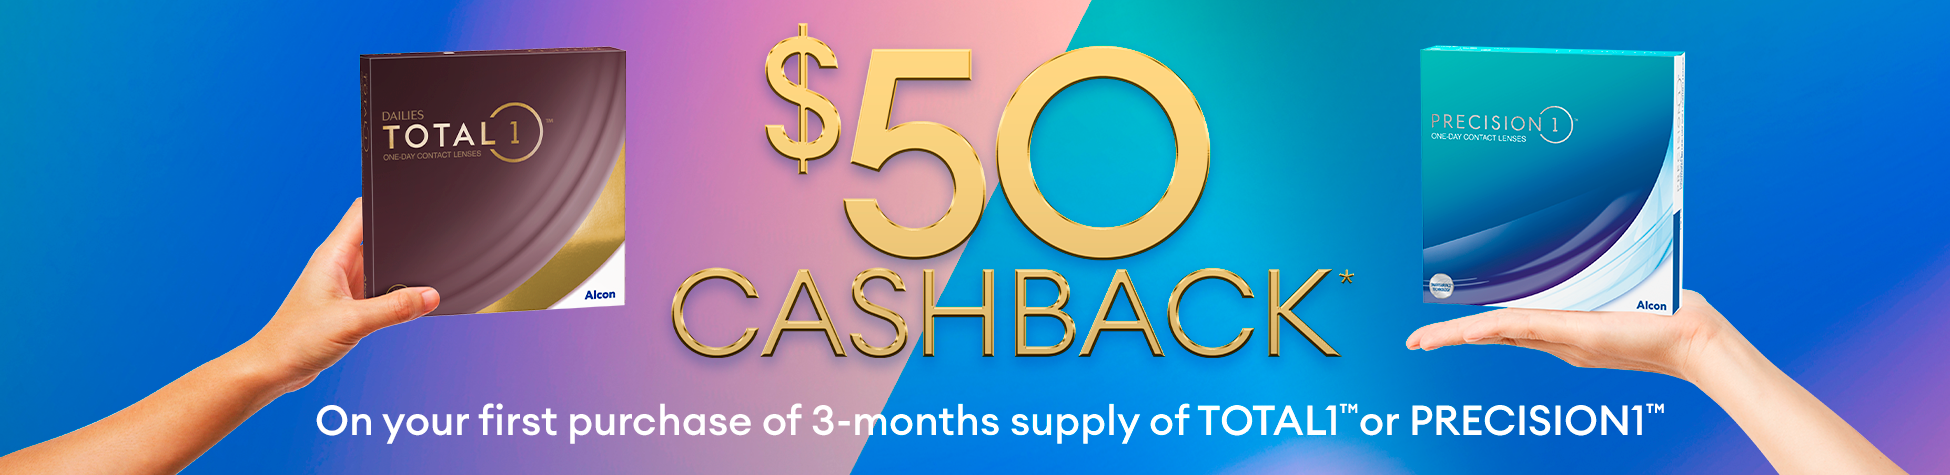 $50 Cashback on your first purchase of 3-months supply of Total1 or Precision1 at Alcon